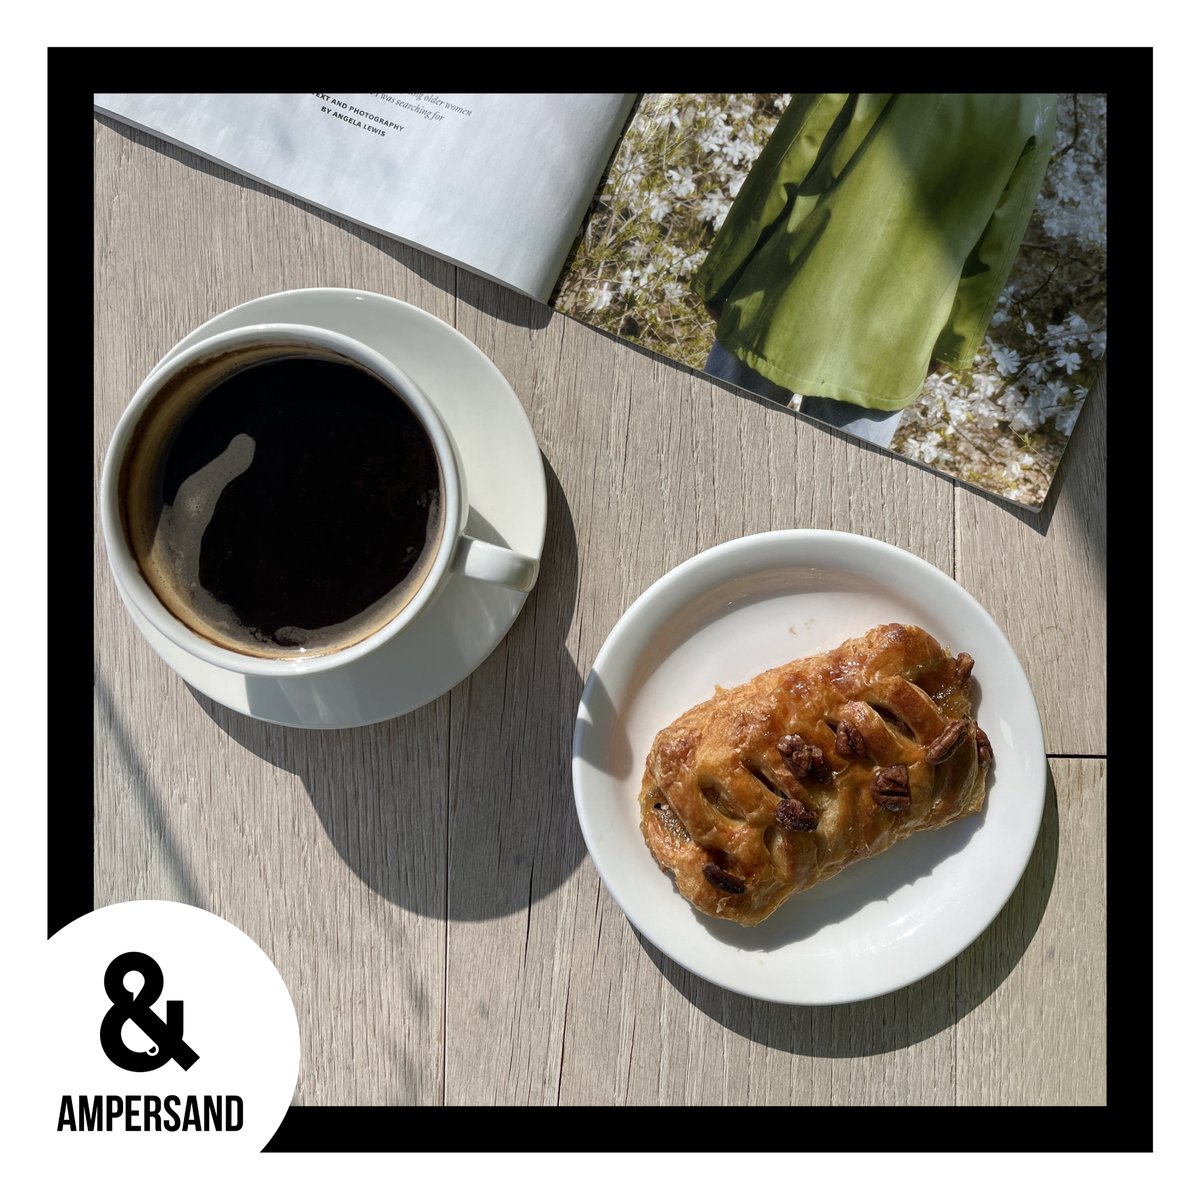 Ampersand Café at Halifax Central Library is a great place to read a book, grab a drink and enjoy the city's views! Have you visited this little social enterprise of ours yet?

#halifaxfood #halifaxcafe #halifaxcoffee #halifaxns #nonprofit #socialenterprise